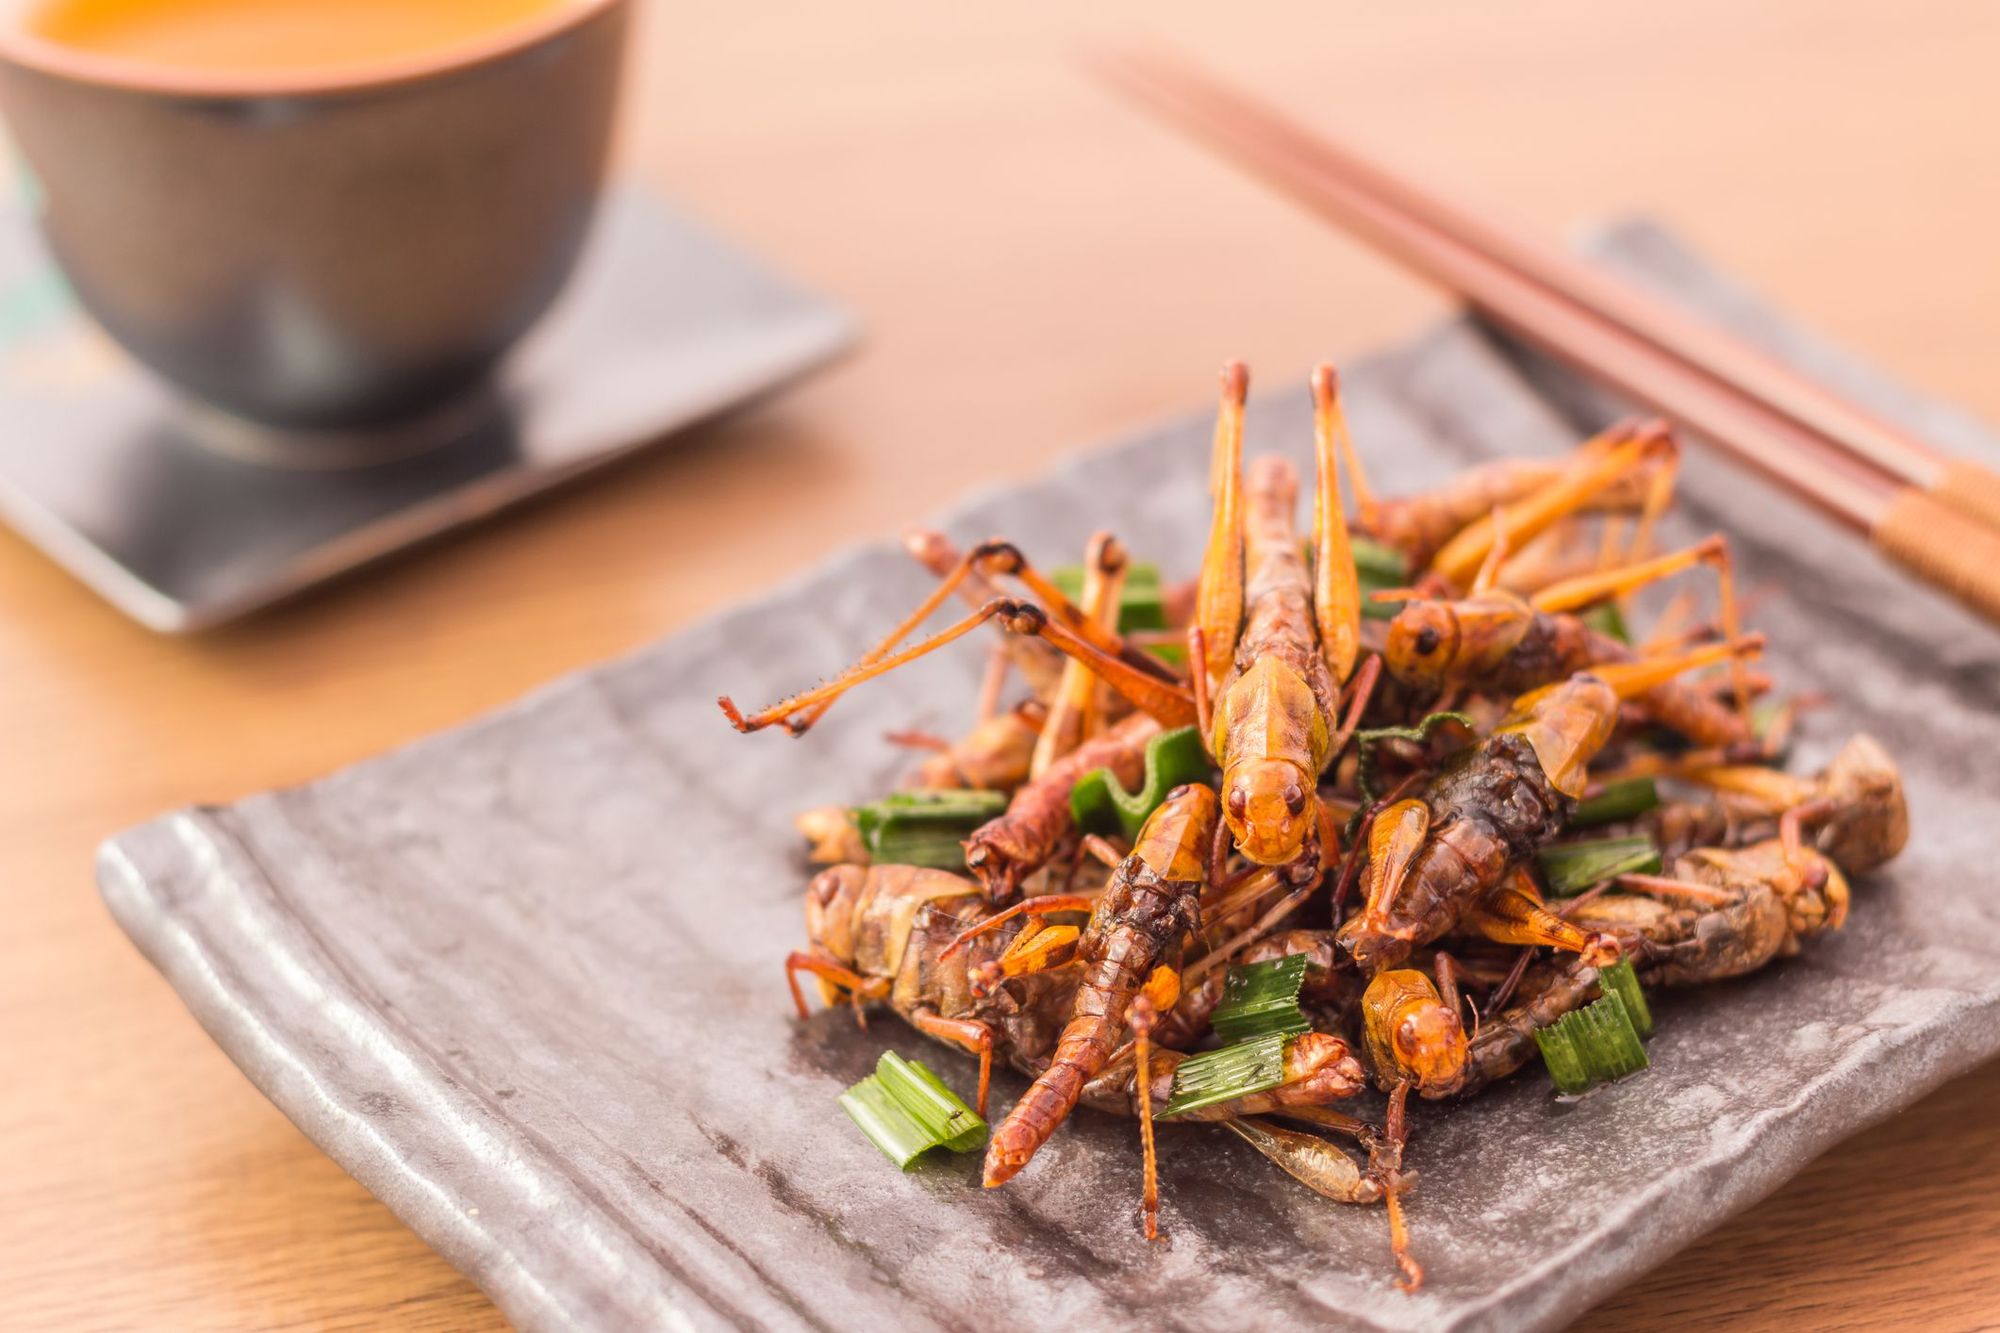 Bill Gates Launches Fast Food Chain Where Food Is Made Out Of Bugs